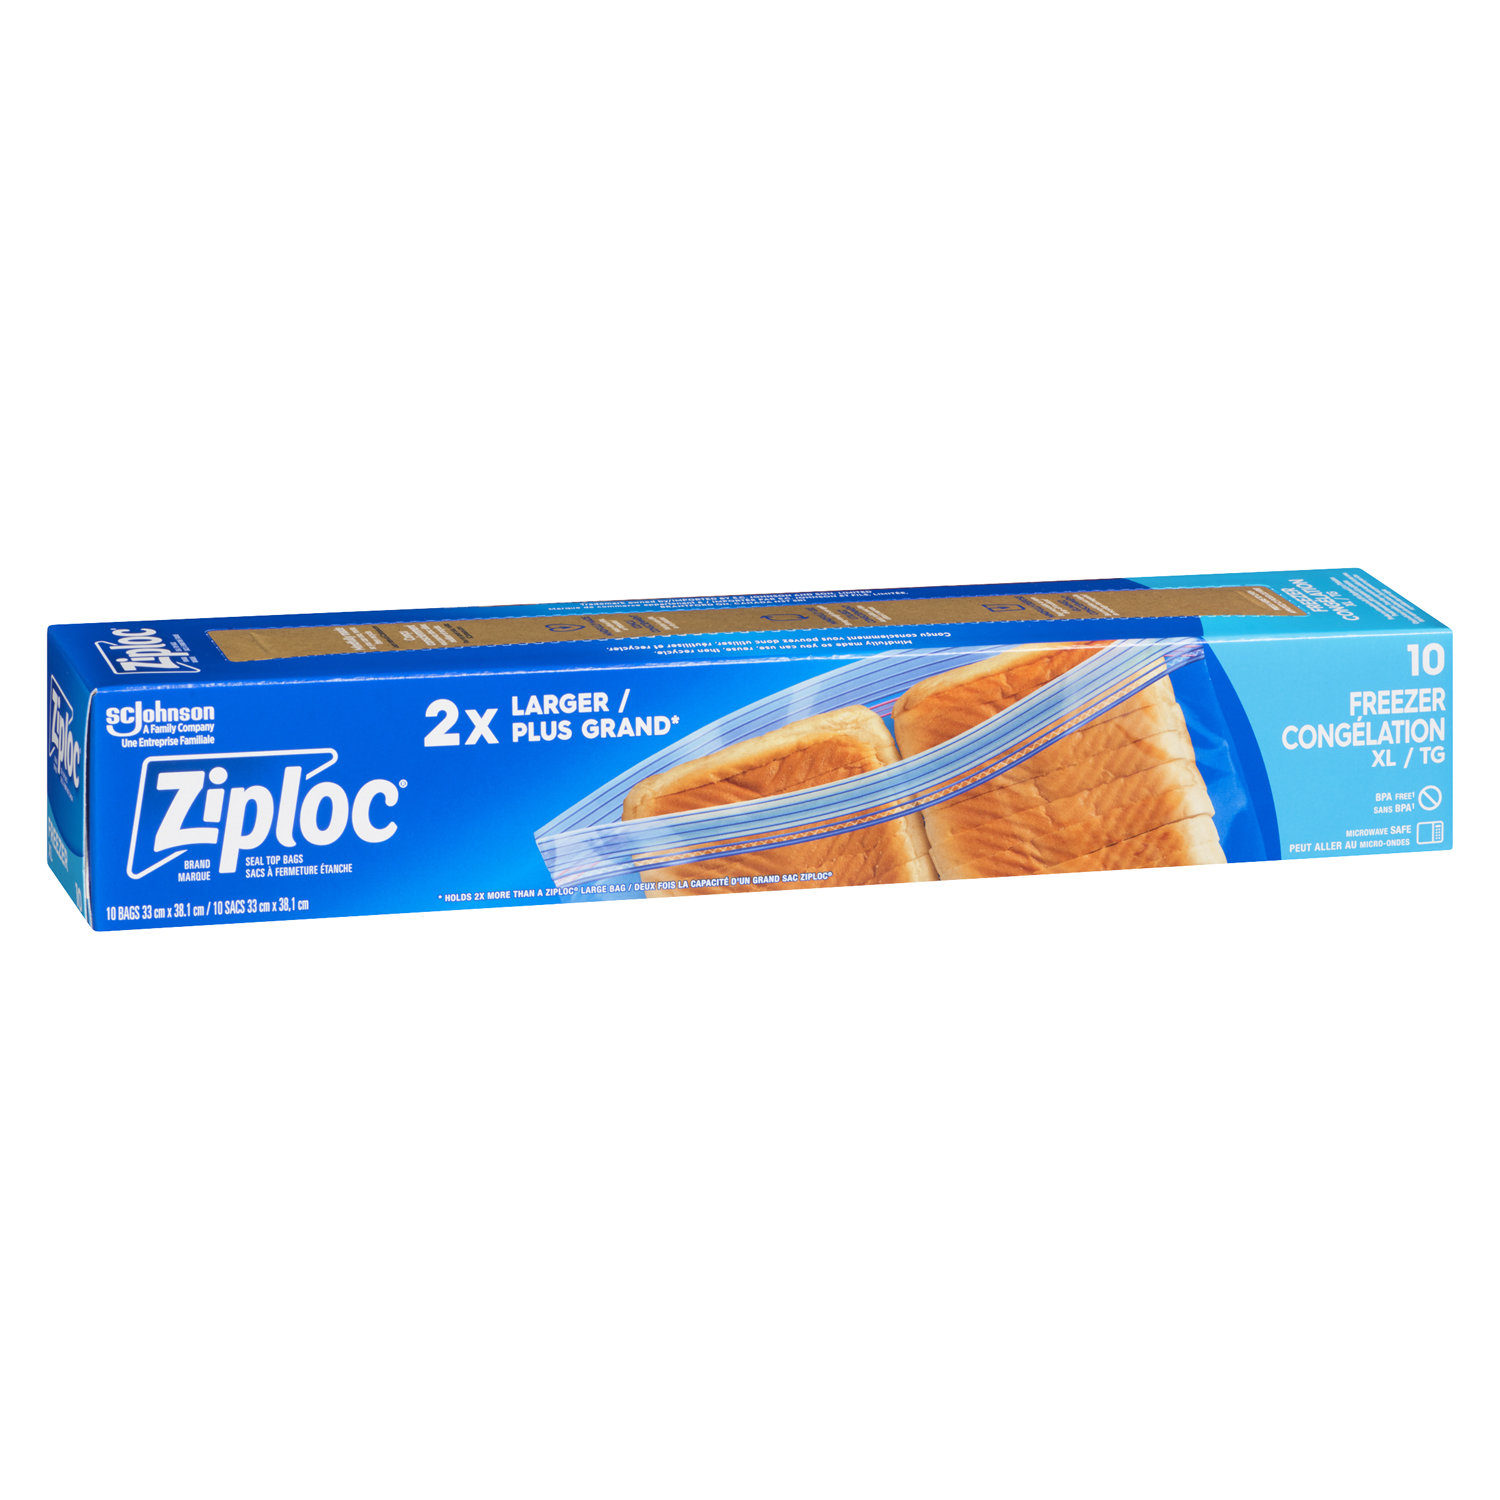 Costco: Hot Deal on Ziploc Freezer Gallon Bags – $3.50 off!! | Living Rich  With Coupons®